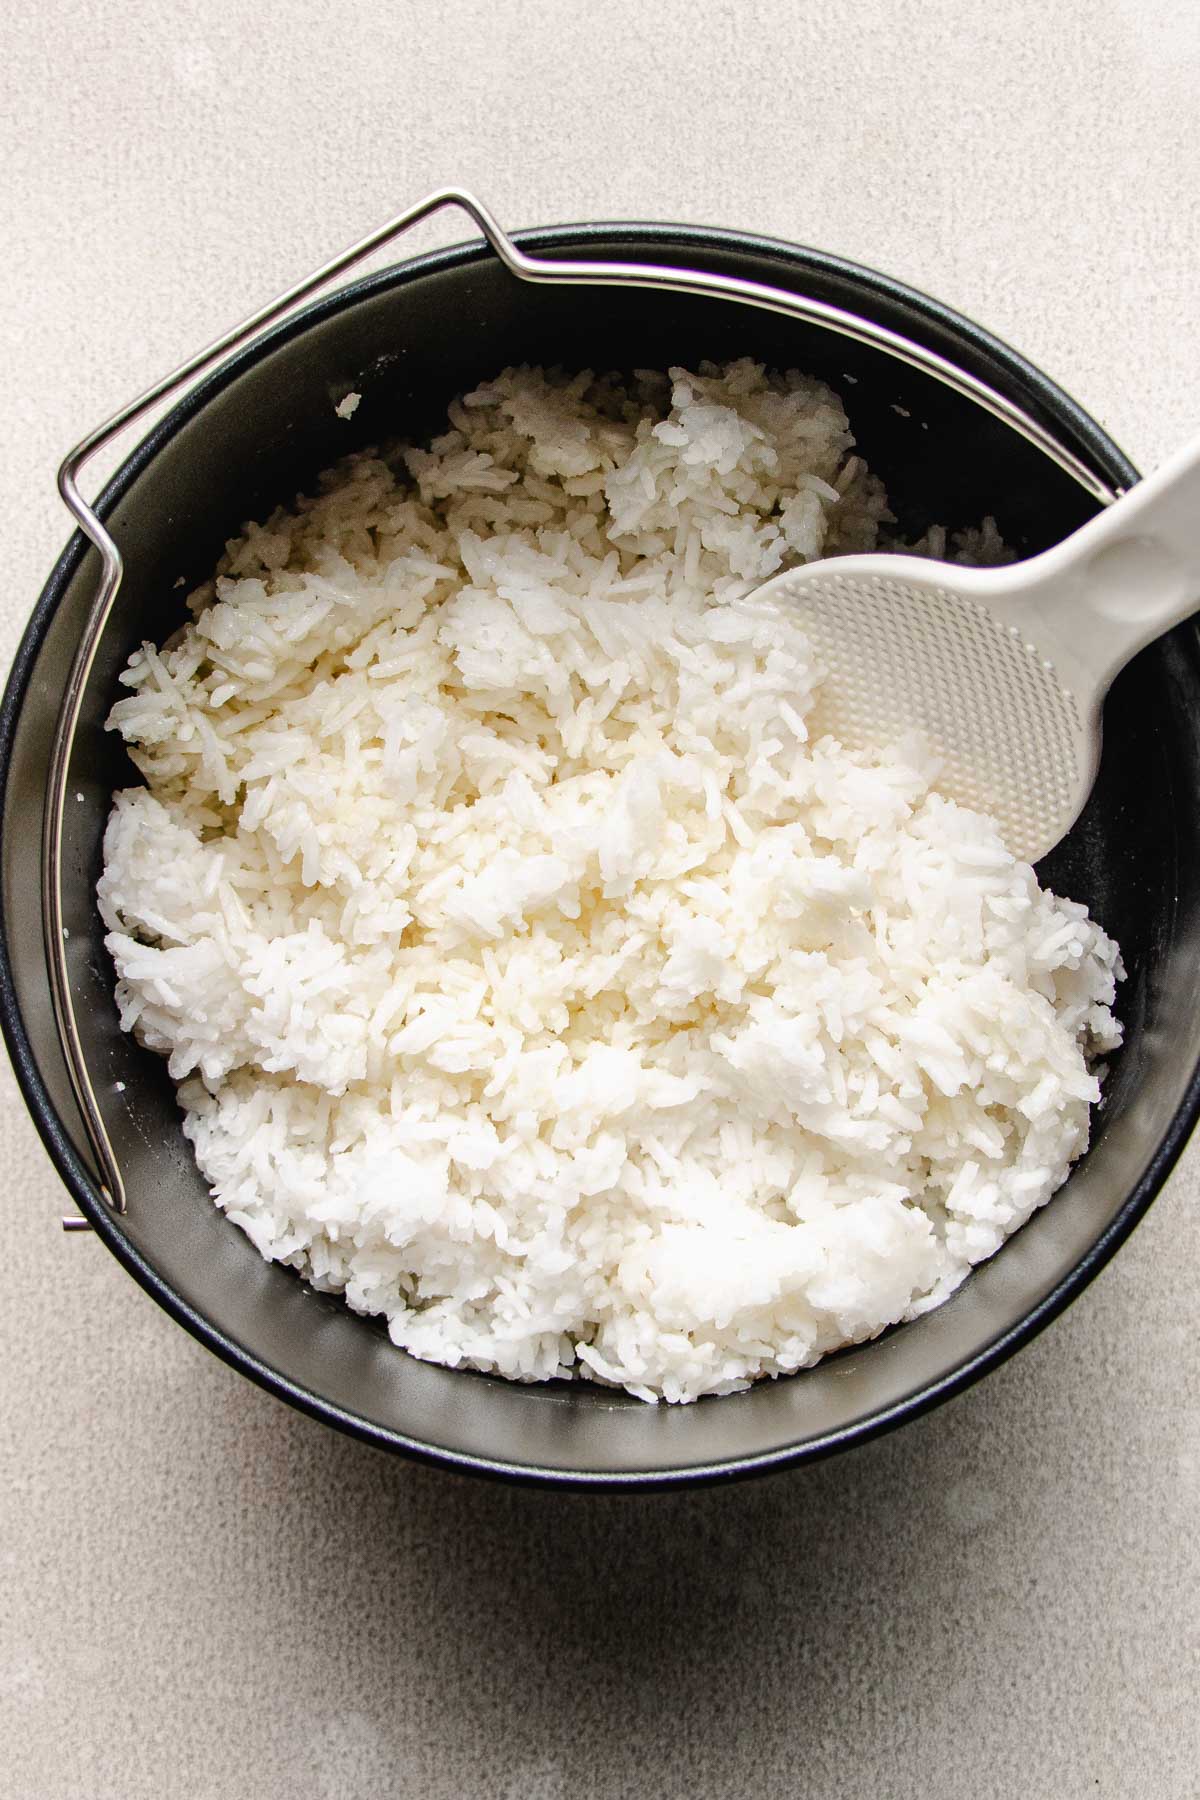 Image shows perfectly cooked white rice in a cake pan made in an air fryer